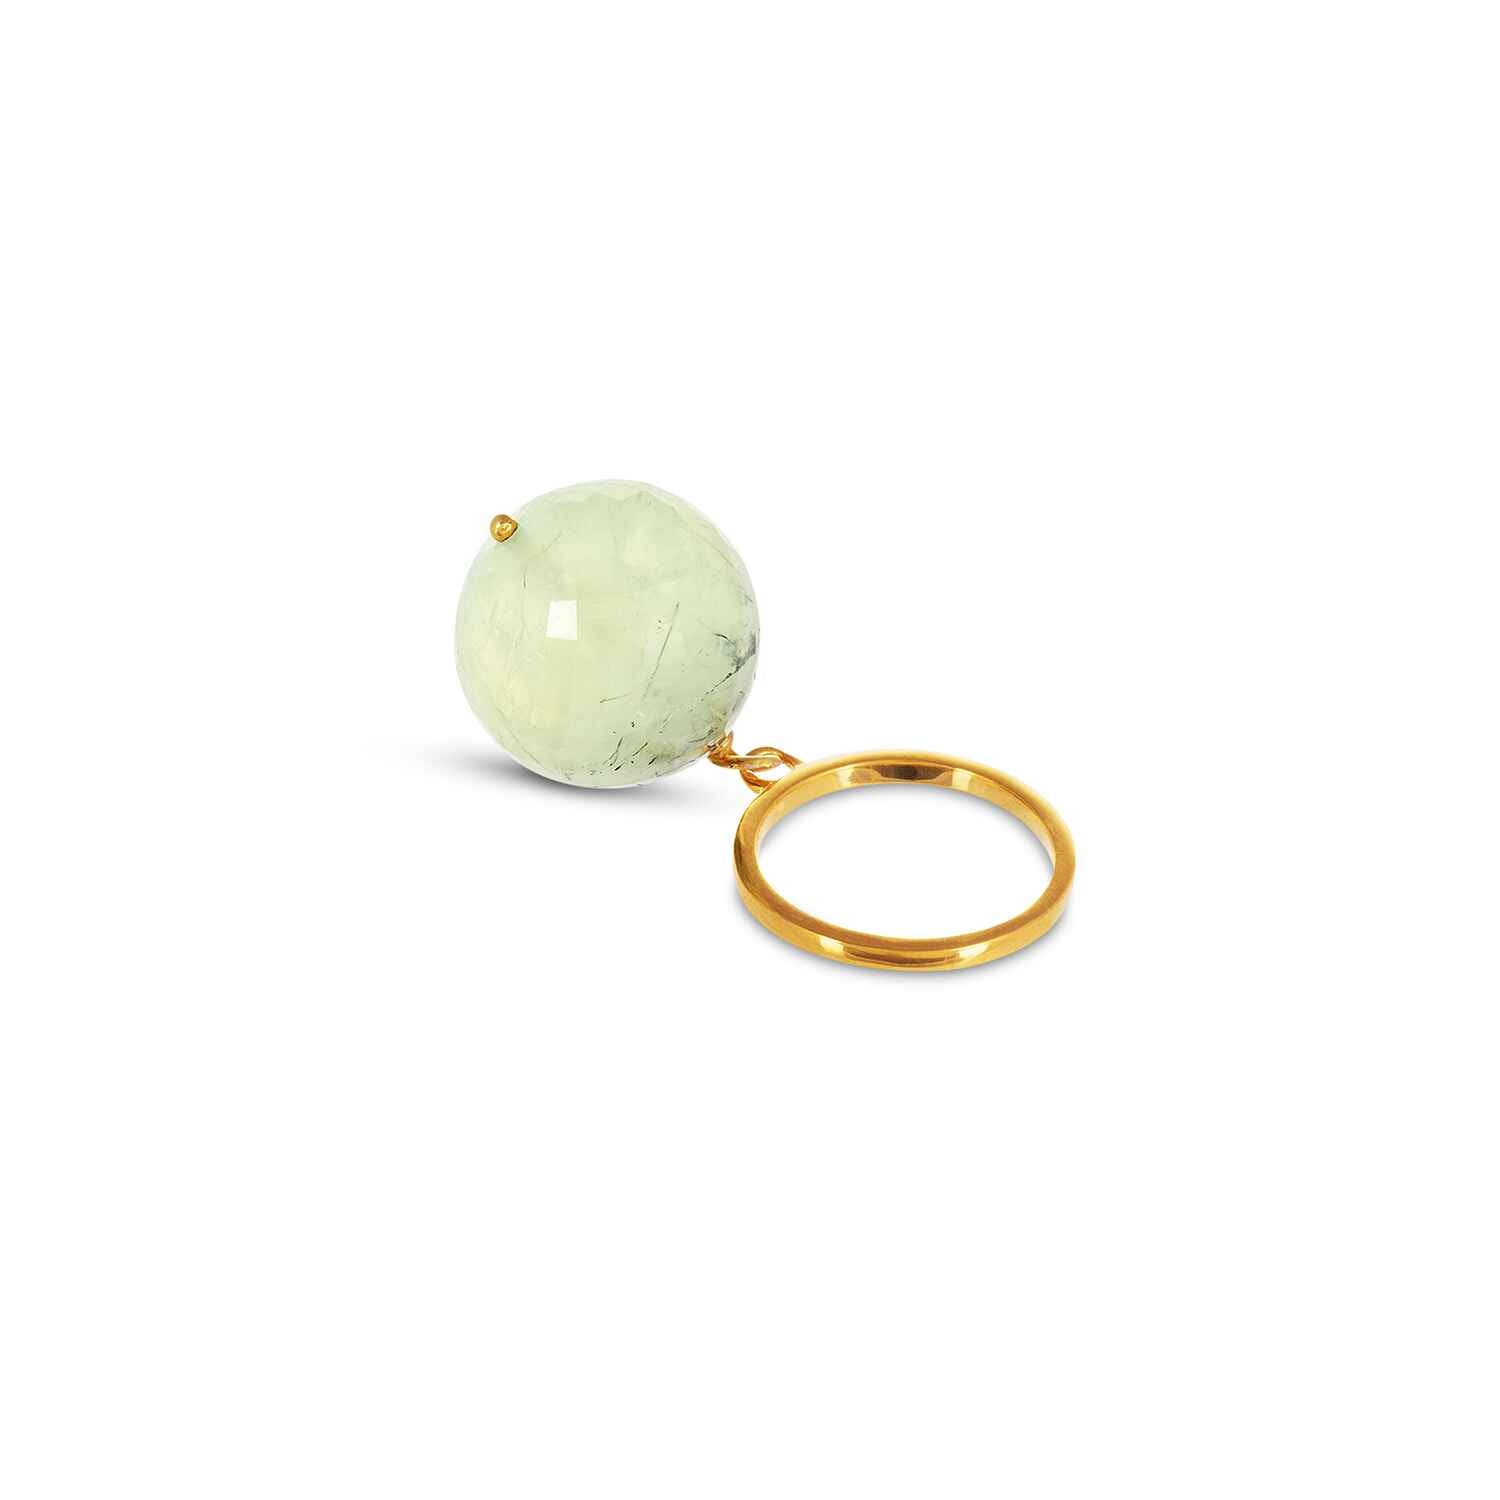 The Bubble Green Aventurine Ring is size adjustable and features a vintage light green gemstone hand faceted to reflect the light. This stunning ring is light around the finger and add a pop of colour to any outfit.